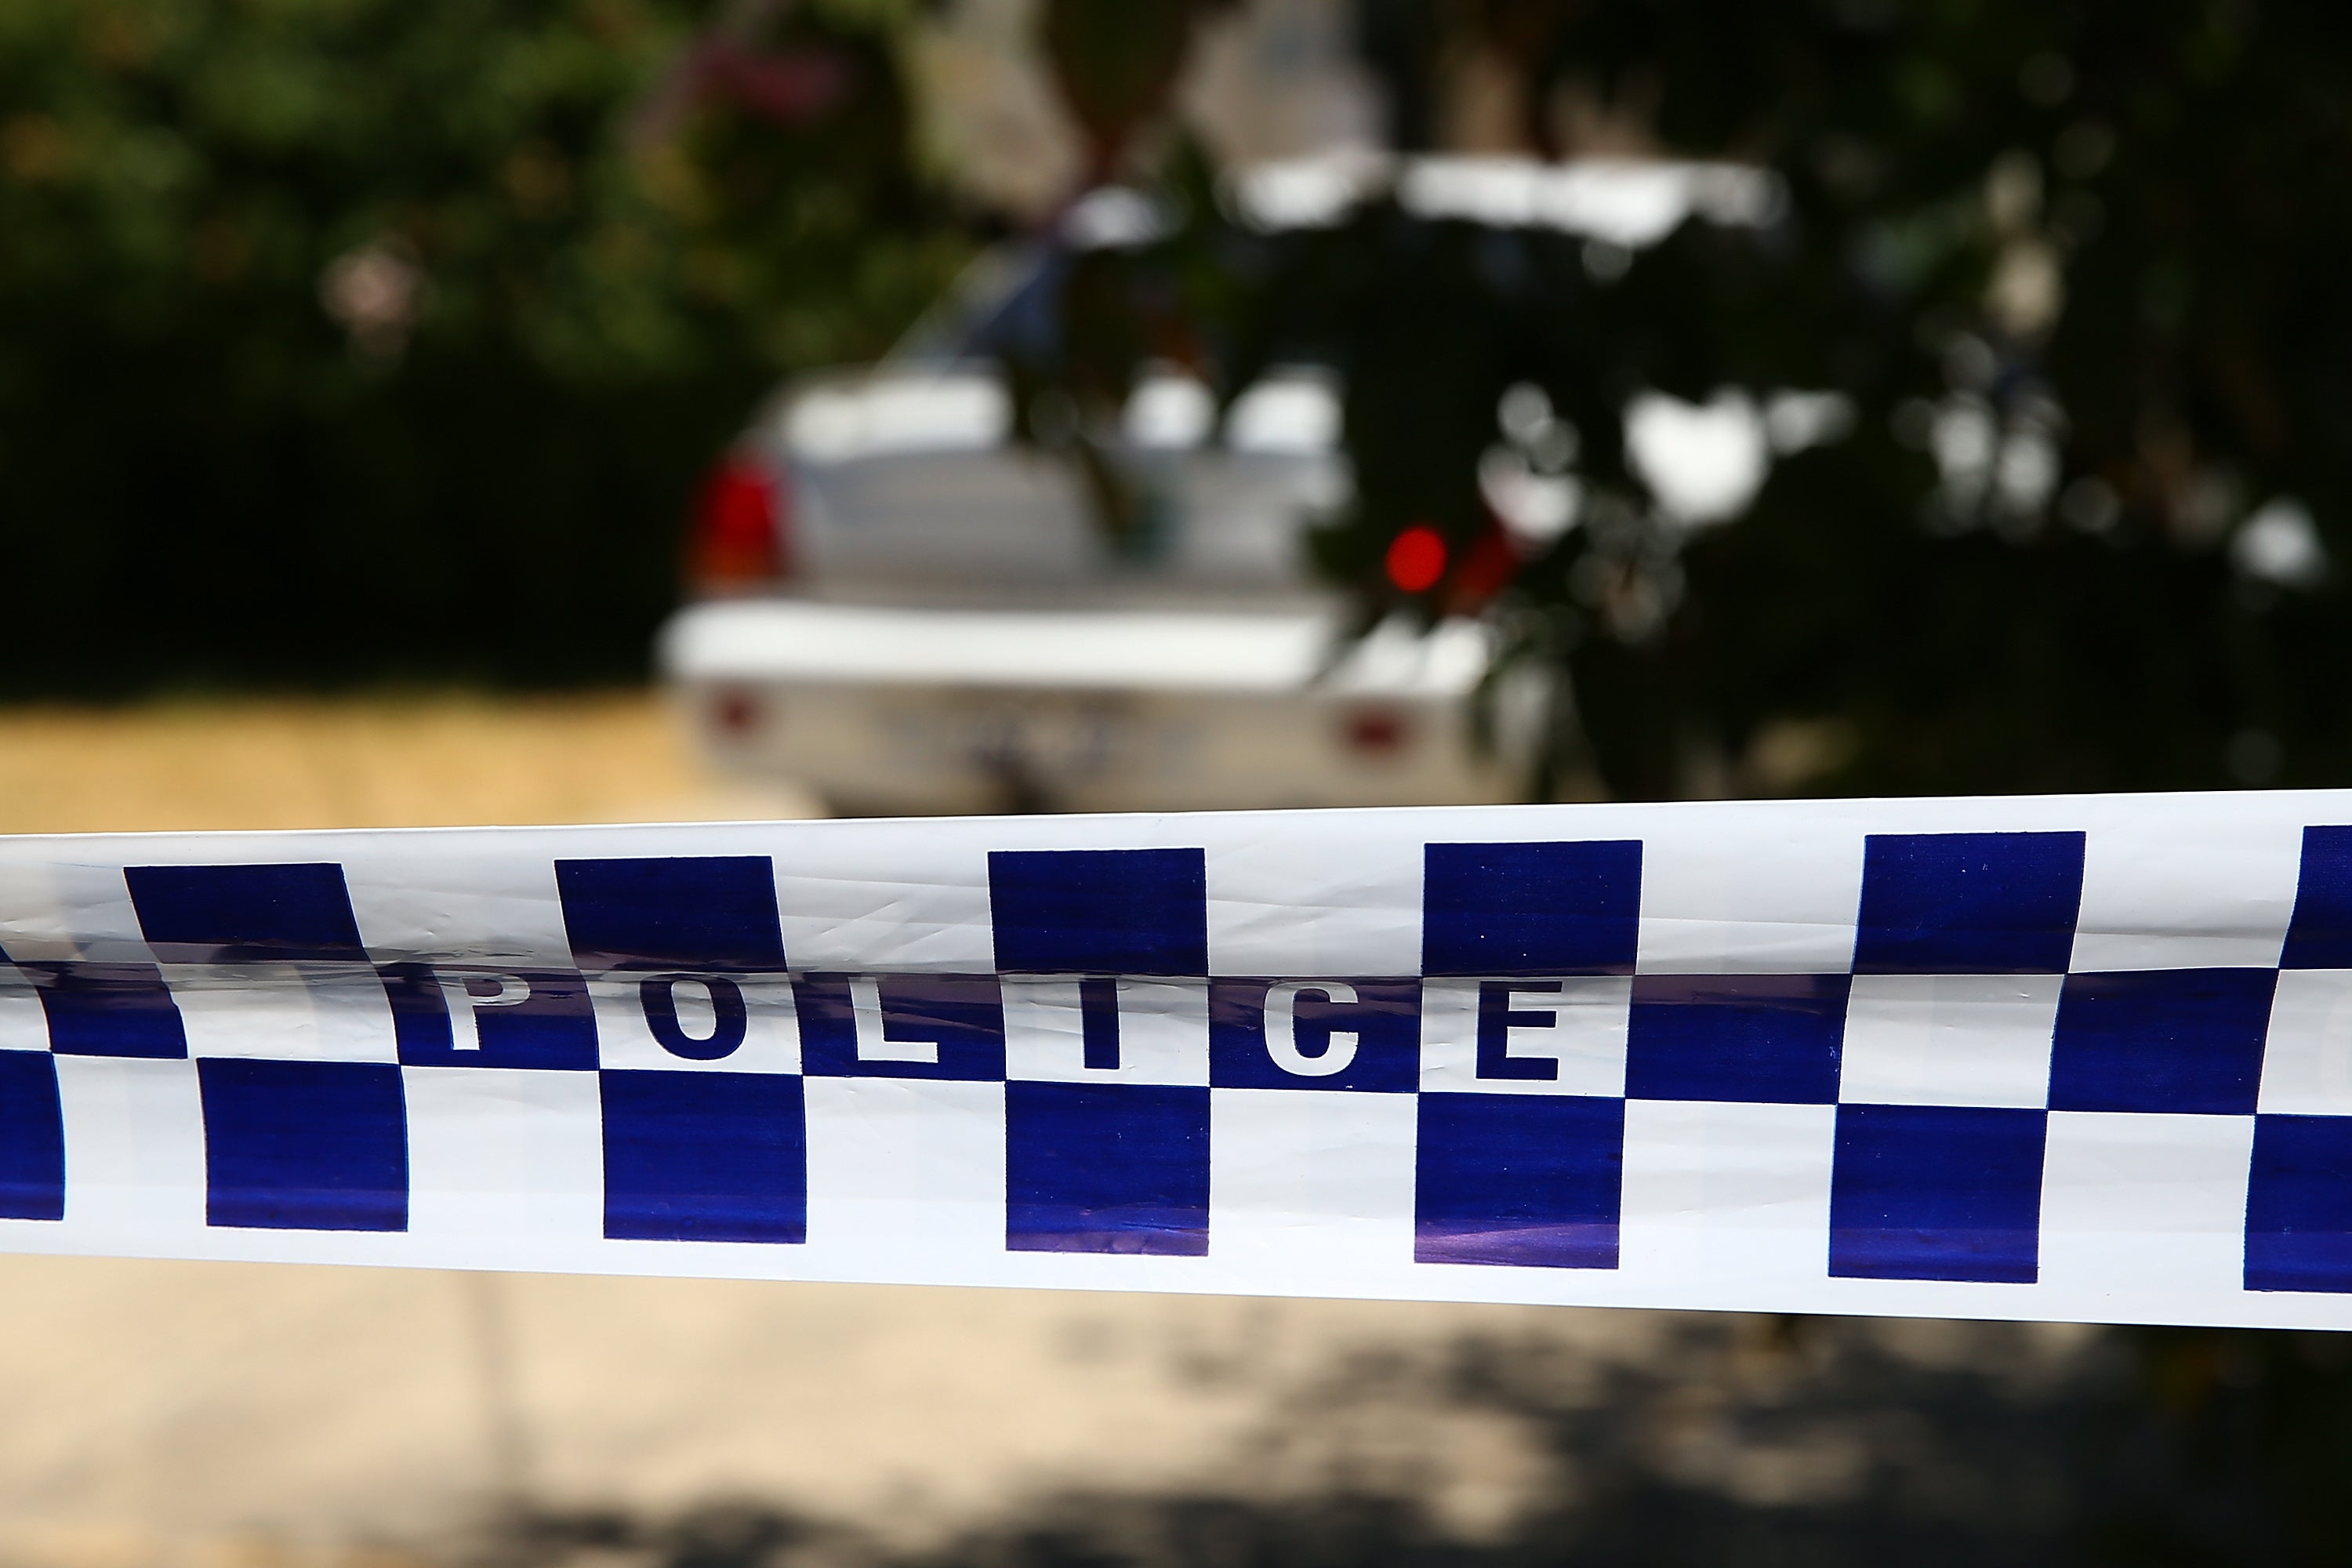 Police carry out forensic investigation at a home in Perth, Australia on 23 December, 2016.